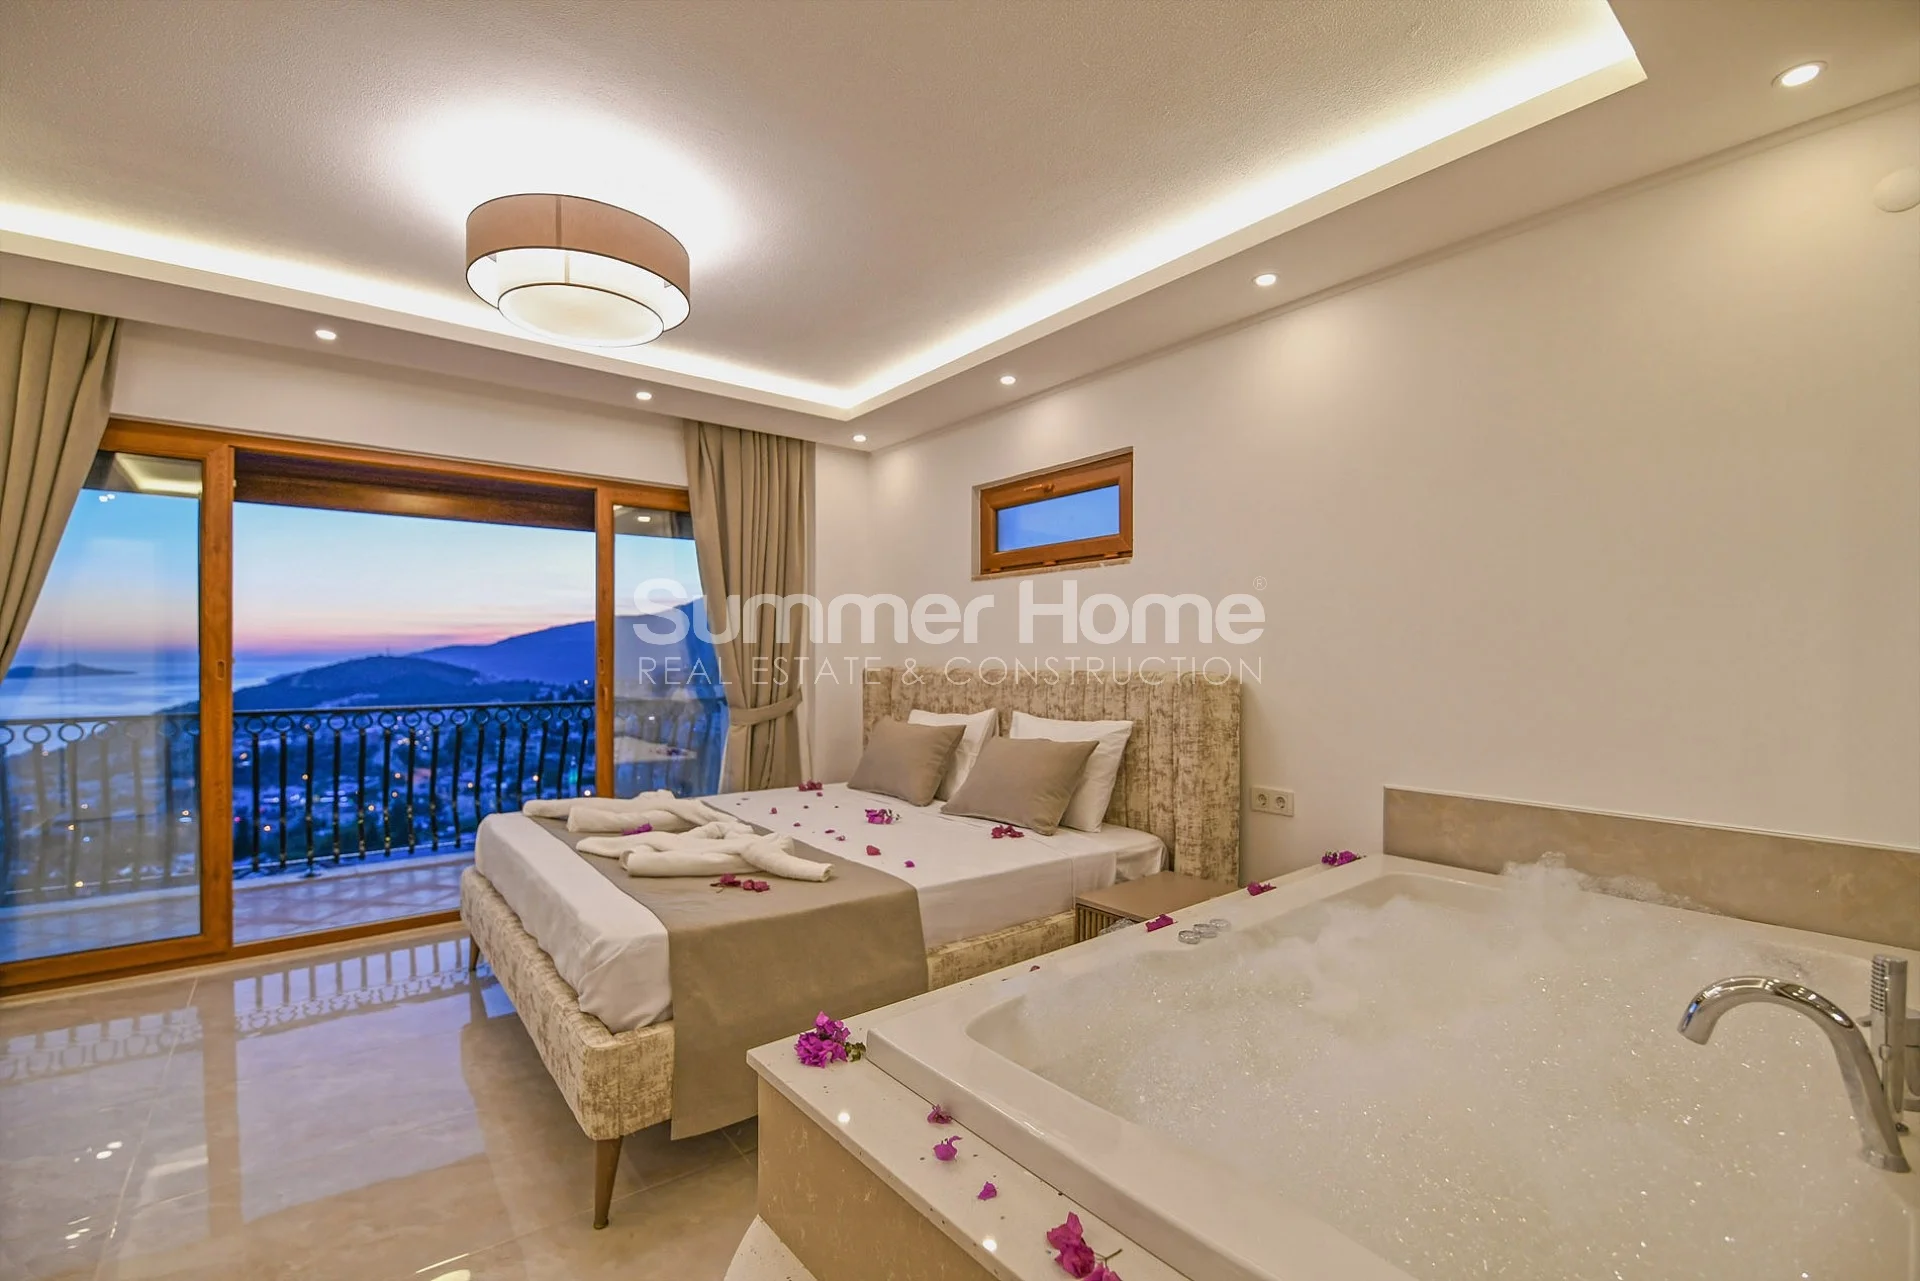 Five-bedroom tranquil villa with private pool in Kalkan Interior - 10